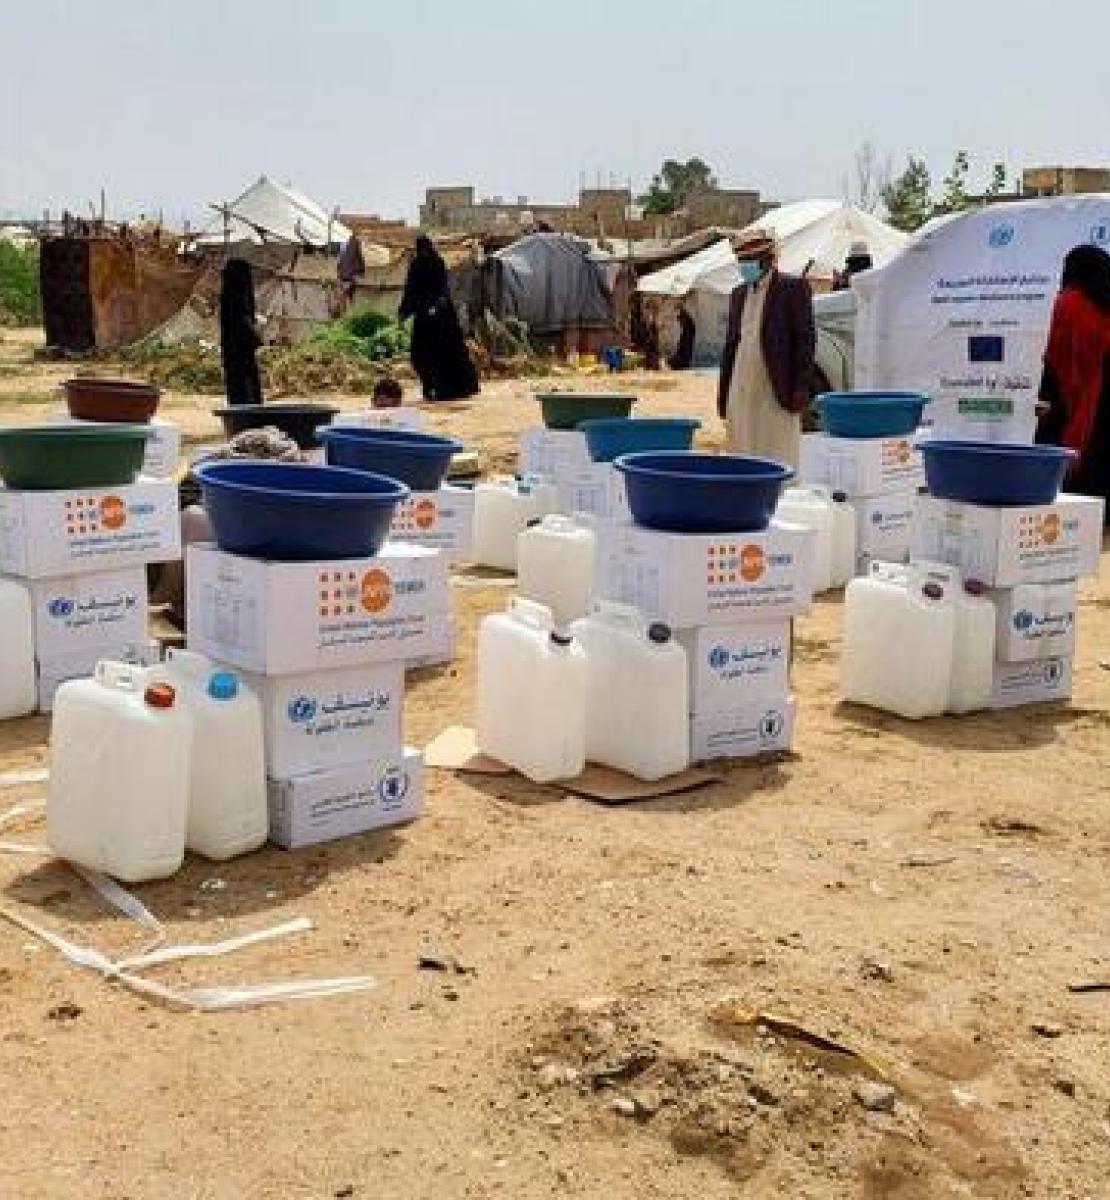 Distributions of kits containing basic health and hygiene items, clothes and ready-to-eat meals are set up for the flooding emergency relief effort in Al Jawf, Yemen. 